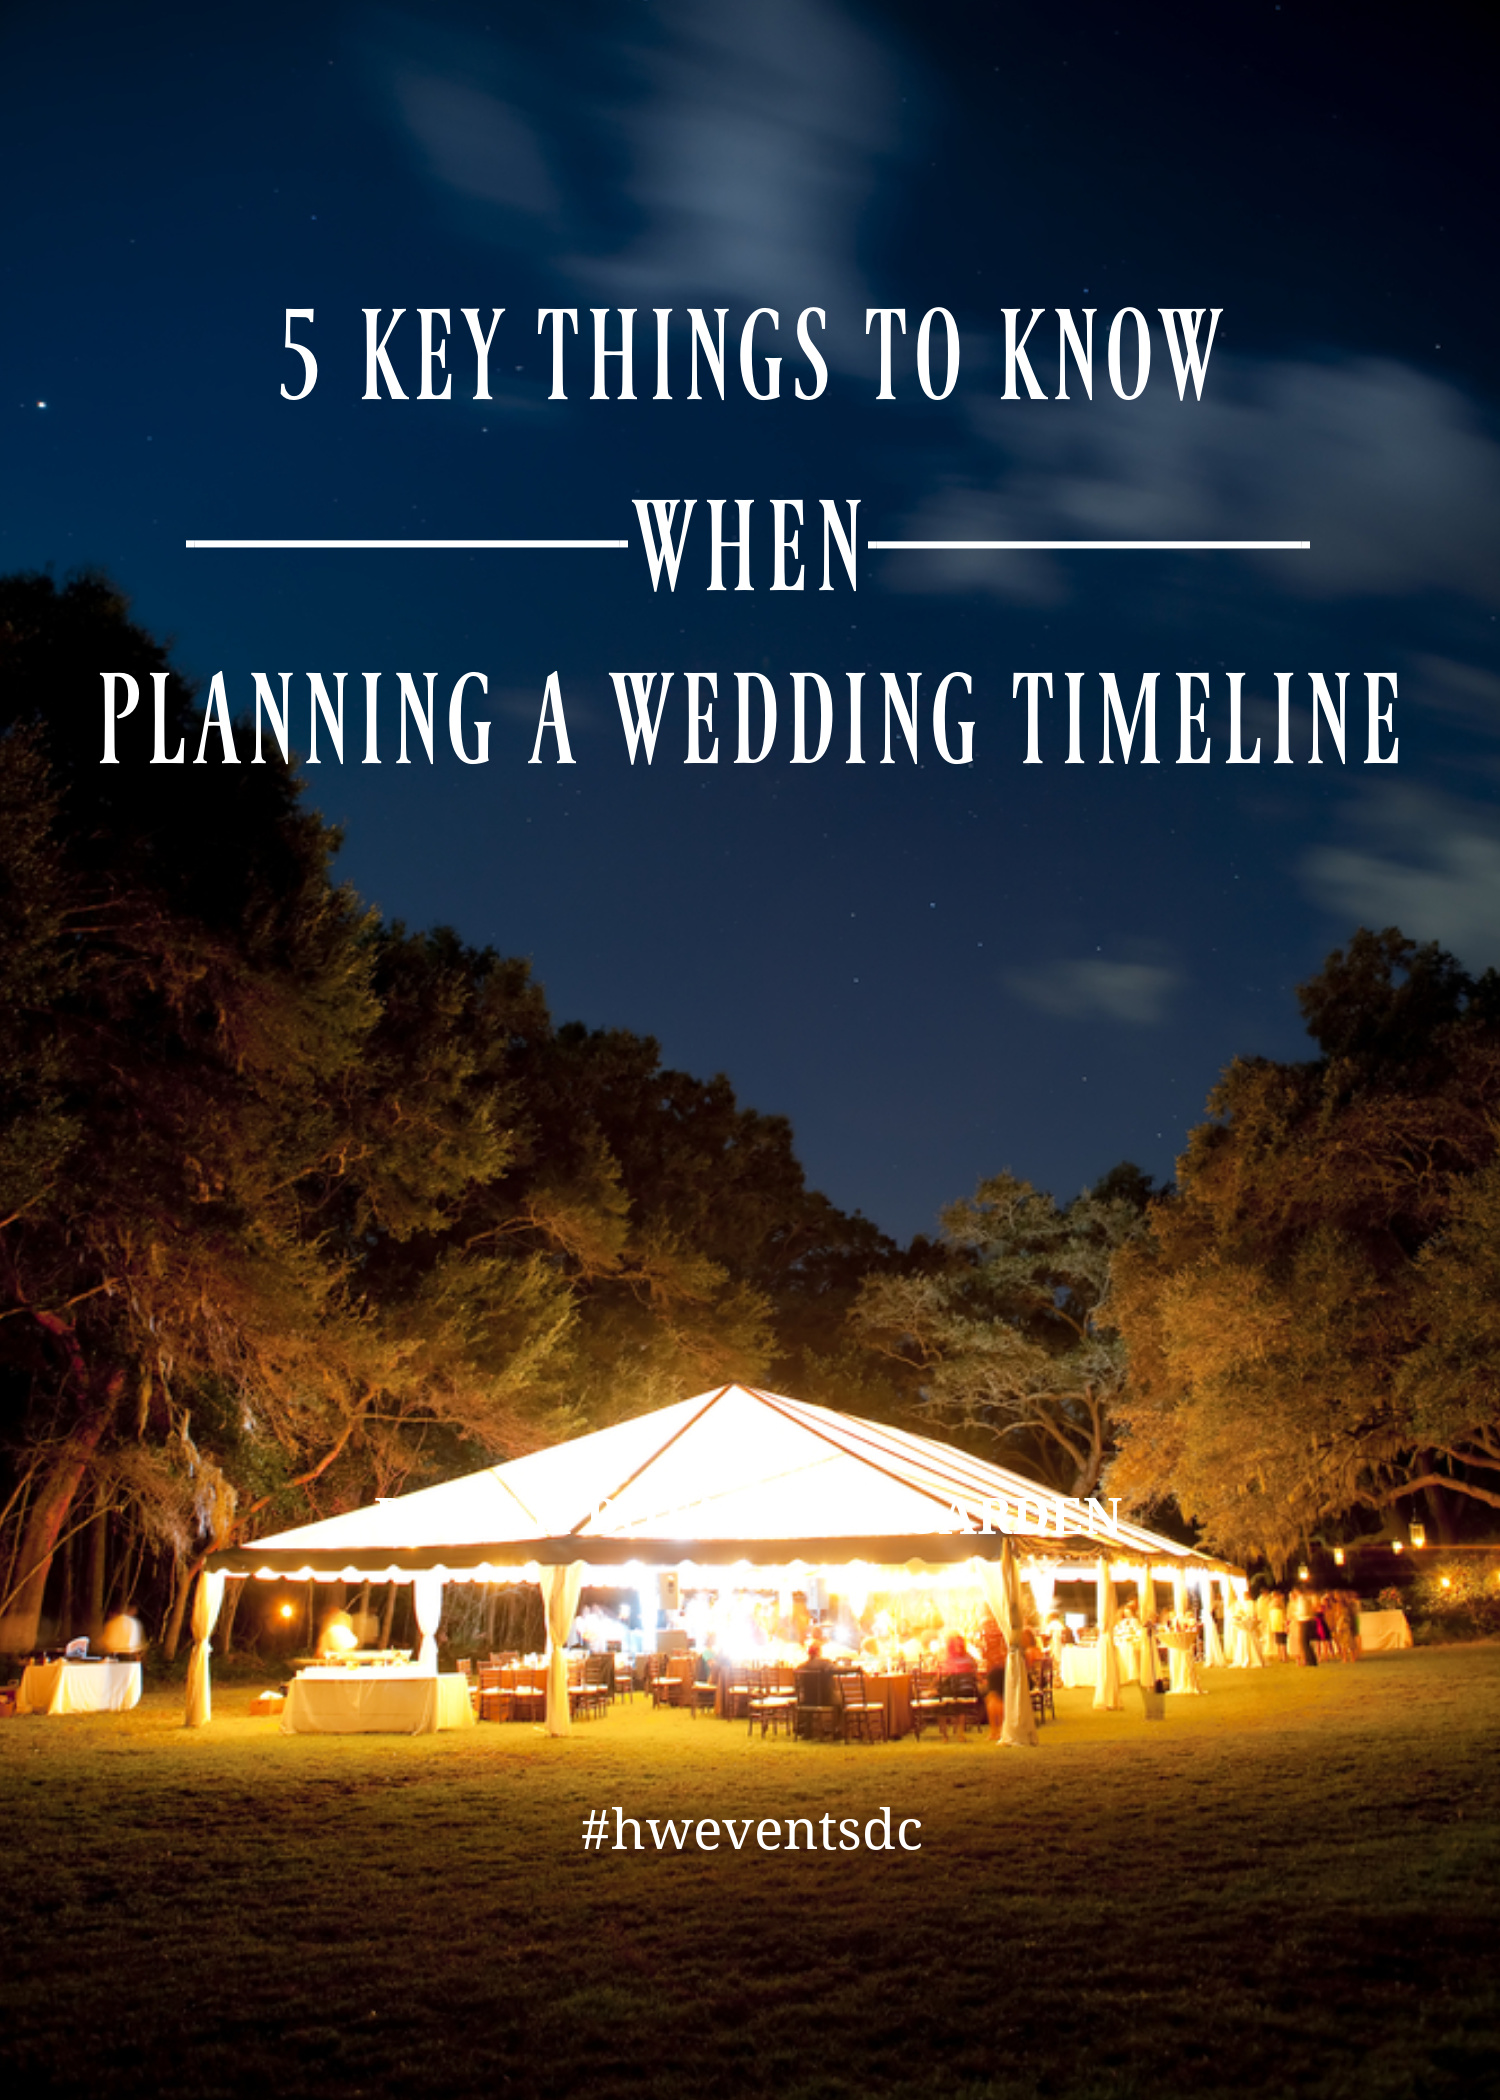 5 Key Things to Know when Planning a Wedding Timeline. Howerton+Wooten Events.